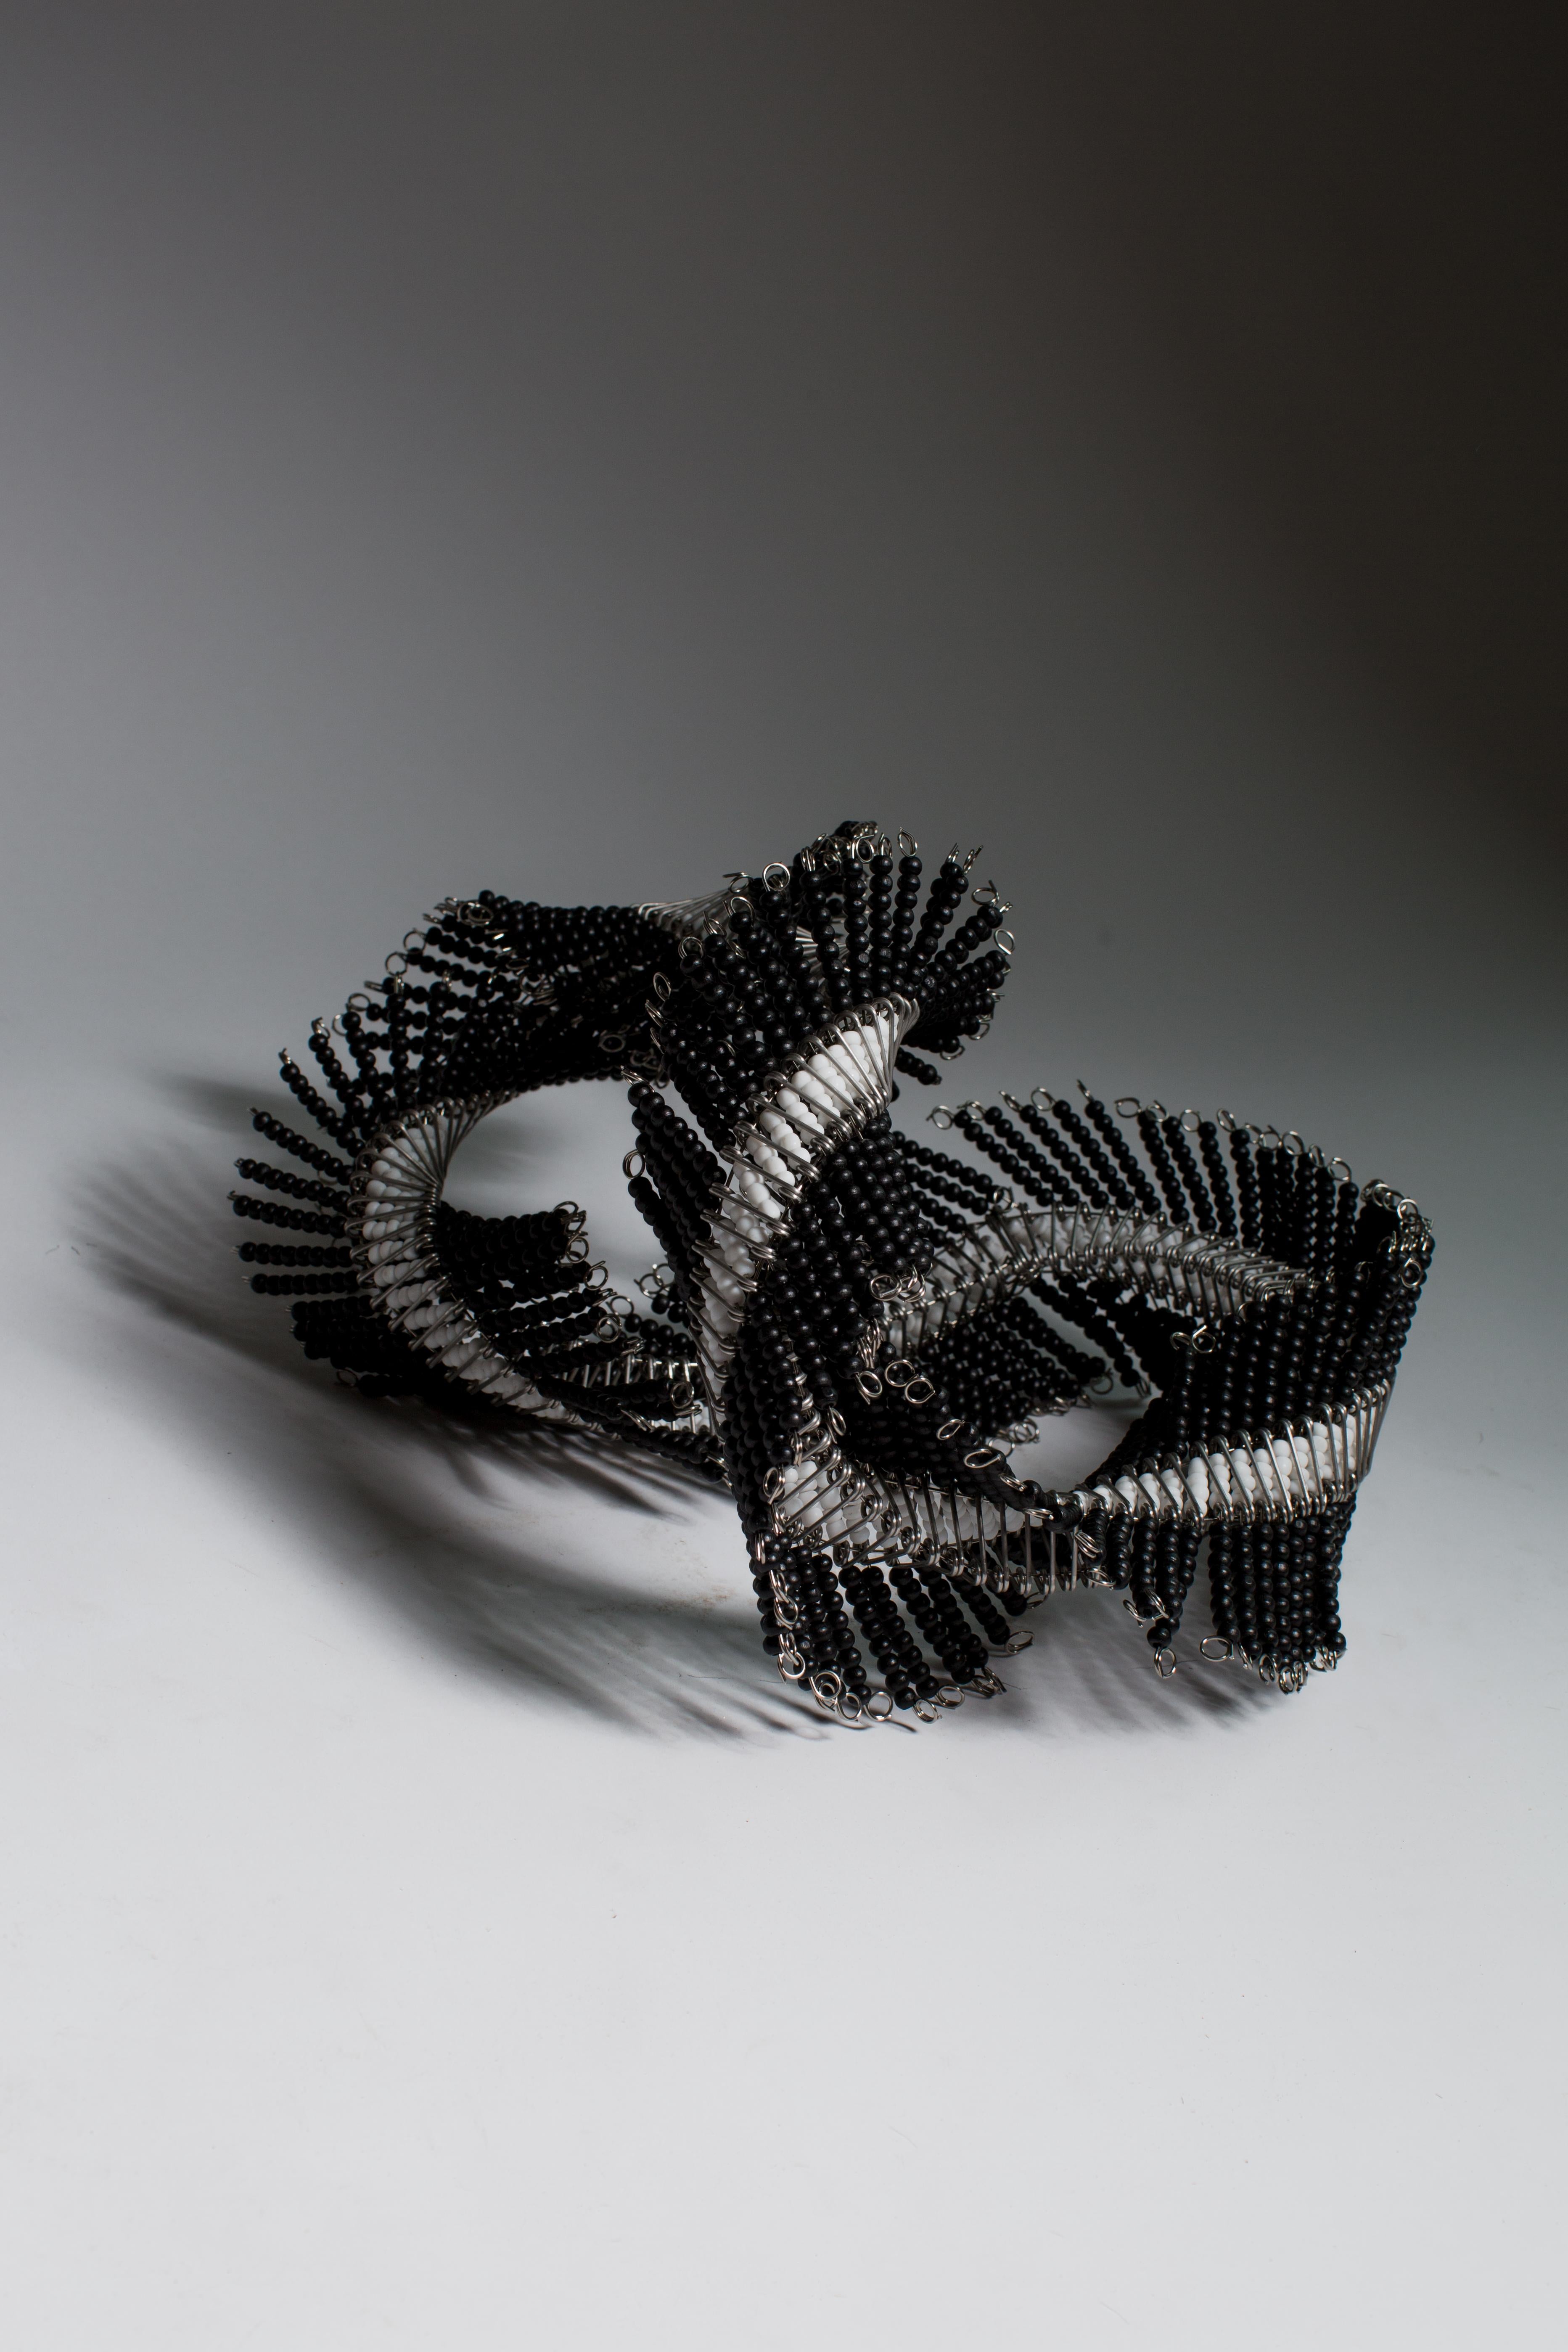 Beaded Whisp 008
Black, White
1/1
Stainless Steel, Wooden Painted Beads, Glass Beads 
25cm x 25cm x 25cm
0.75Kg  
2020

Whisps are meticulously constructed organic sculptural expressions. These expressions are symbolic of what the mind feels like to